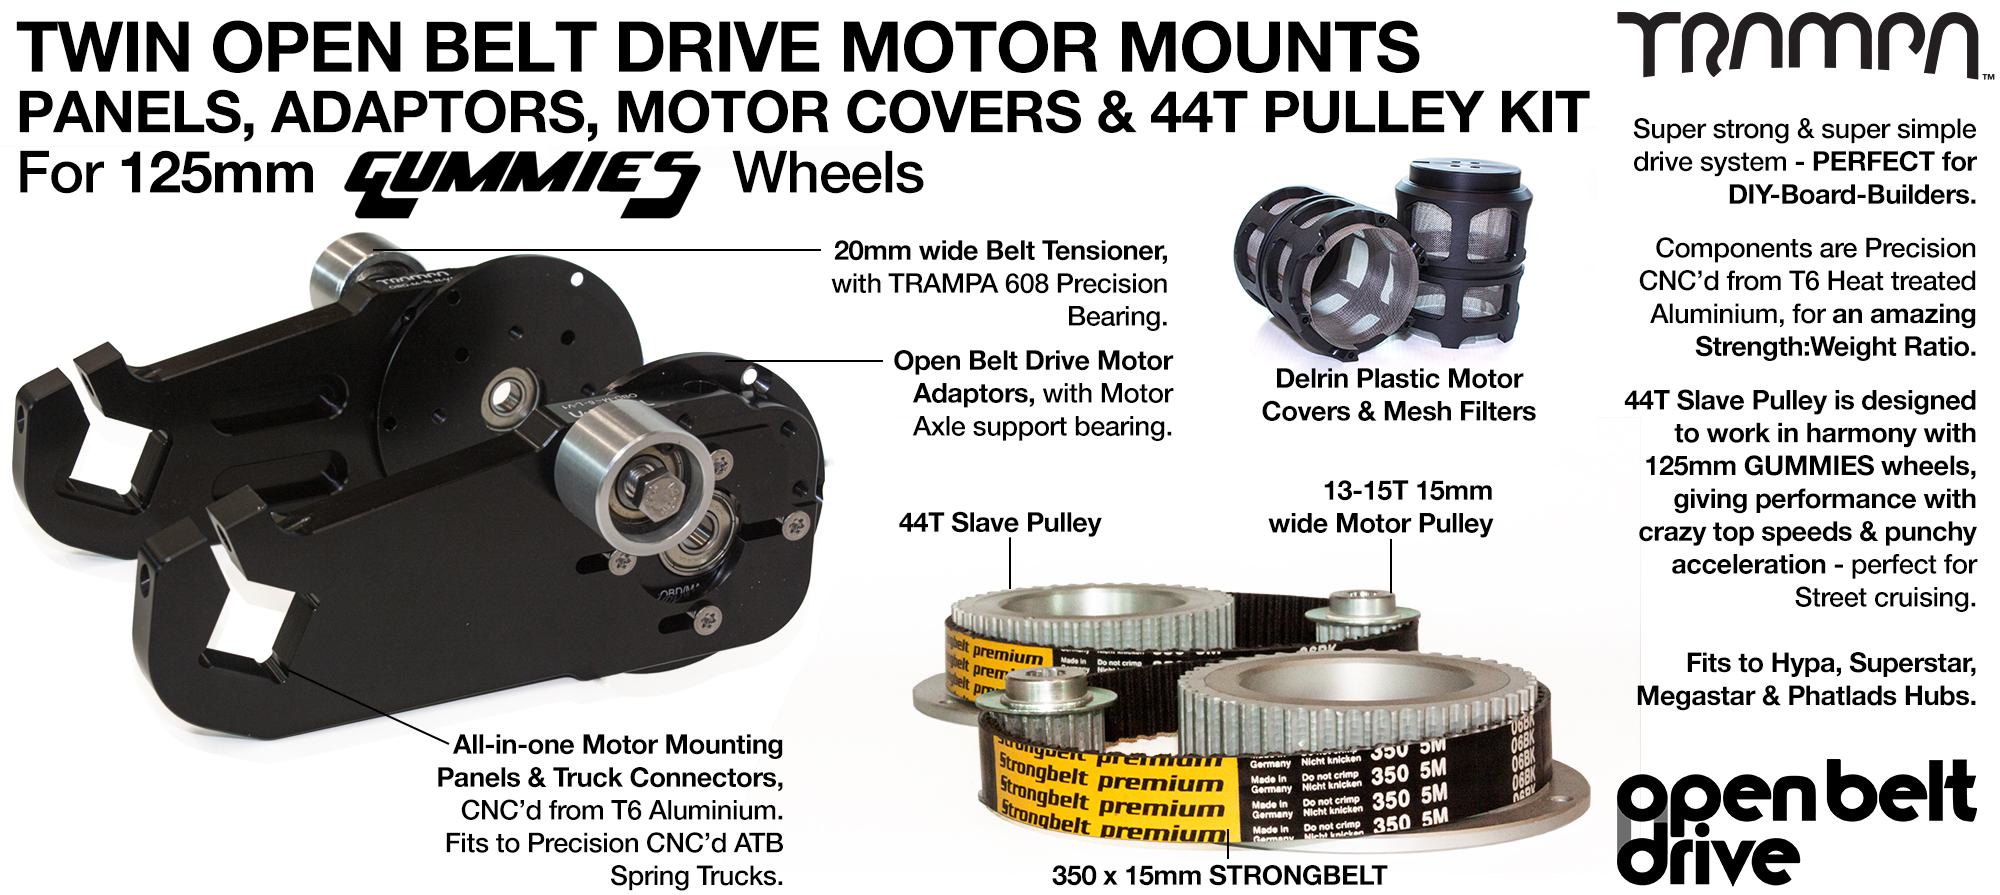 66T OBD Motor Mount with 44T Pulley kit & Motor Filters - TWIN